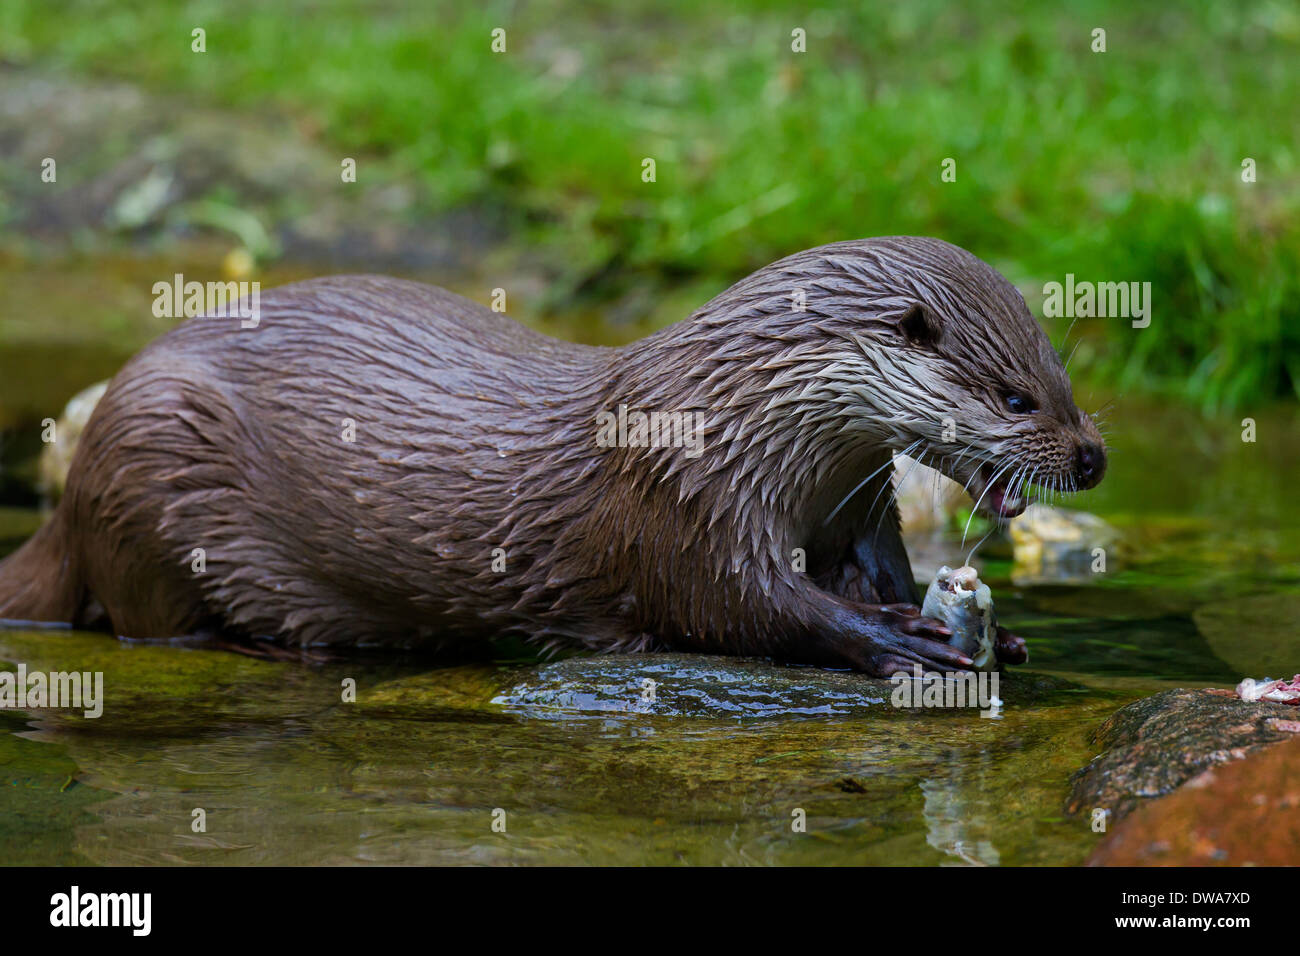 European River Otter (Lutra lutra) eating fish in water of stream Stock Photo